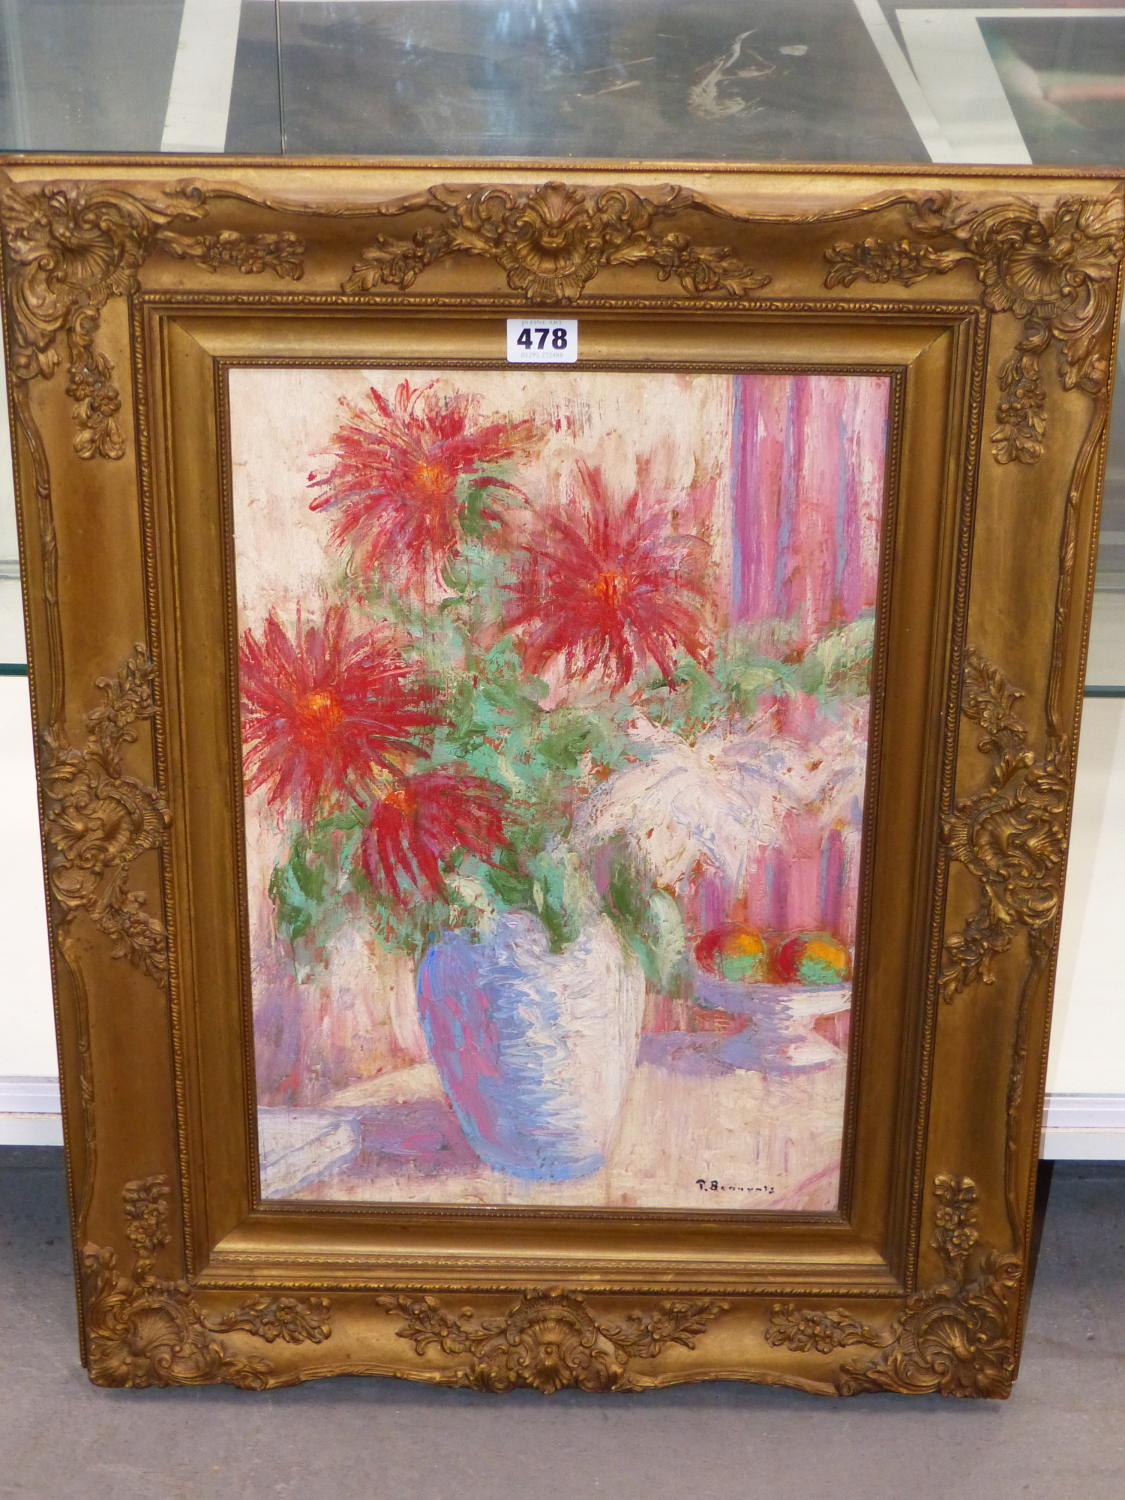 T. BENNINGS(?) (20TH CENTURY), STILL LIFE OF FLOWERS IN A VASE, SIGNED INDISTINCTLY, OIL ON BOARD, - Image 3 of 4